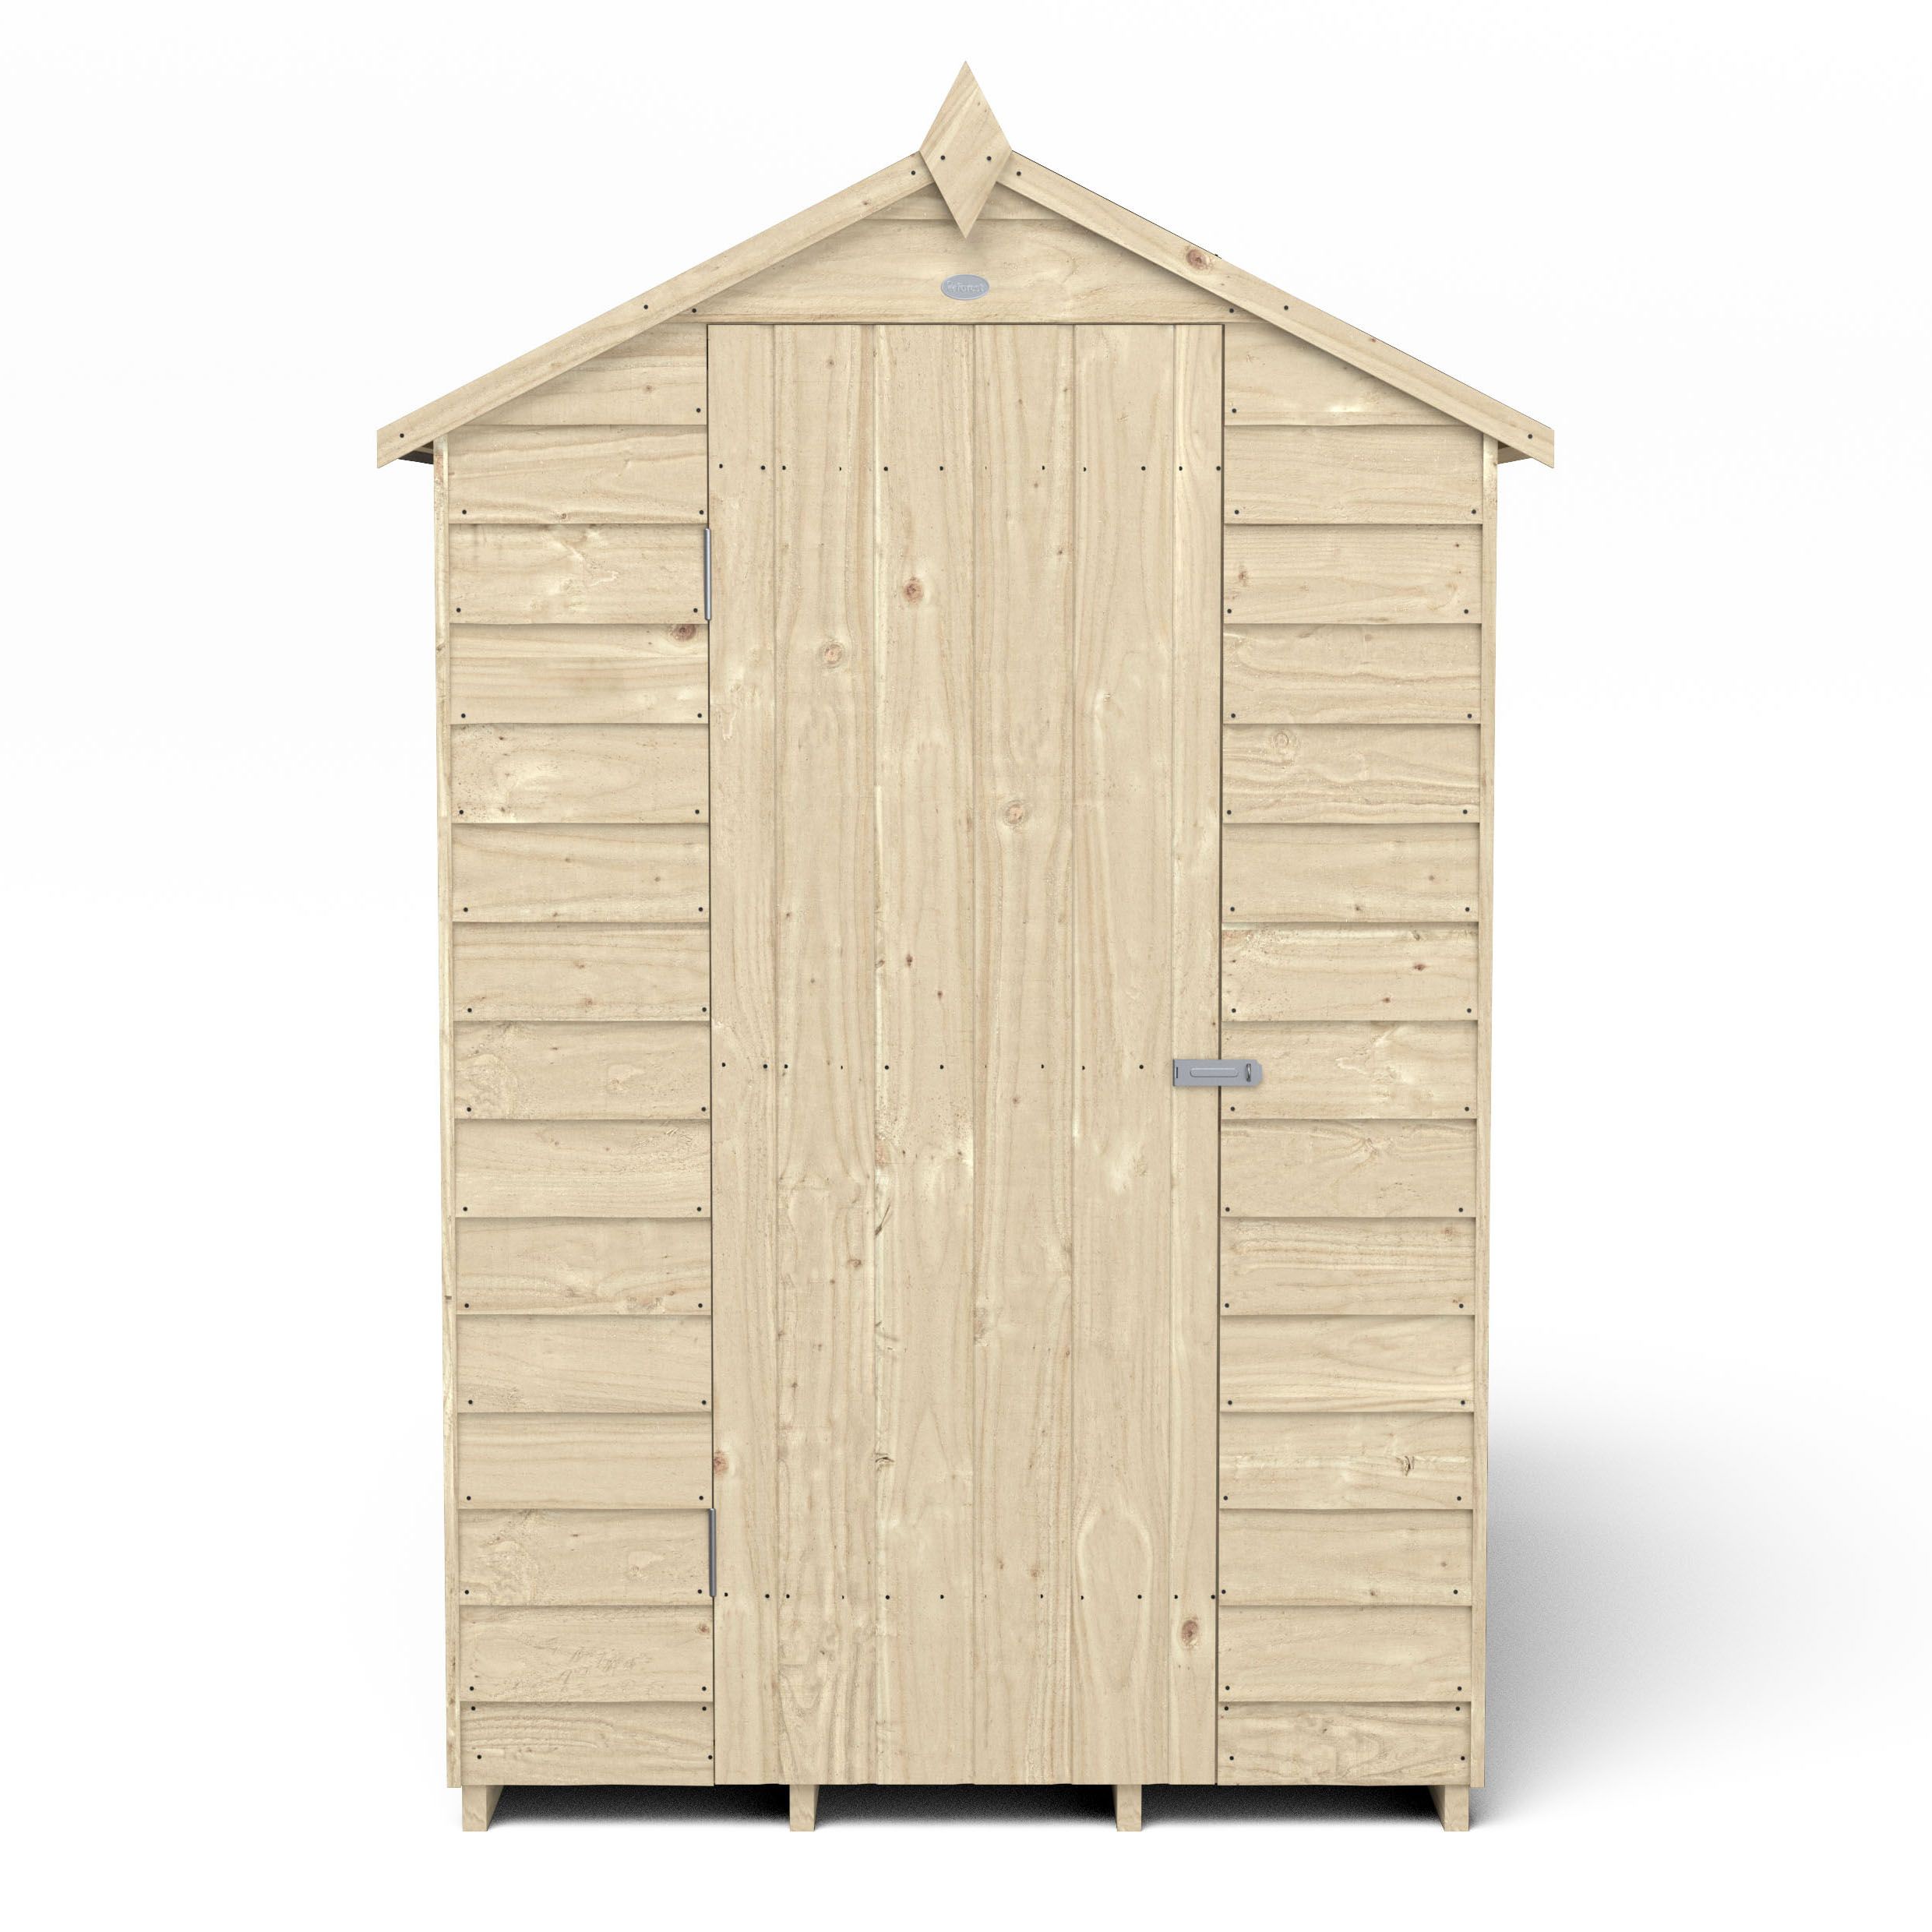 Forest Garden Overlap 6x4 ft Apex Wooden Pressure treated Shed with floor